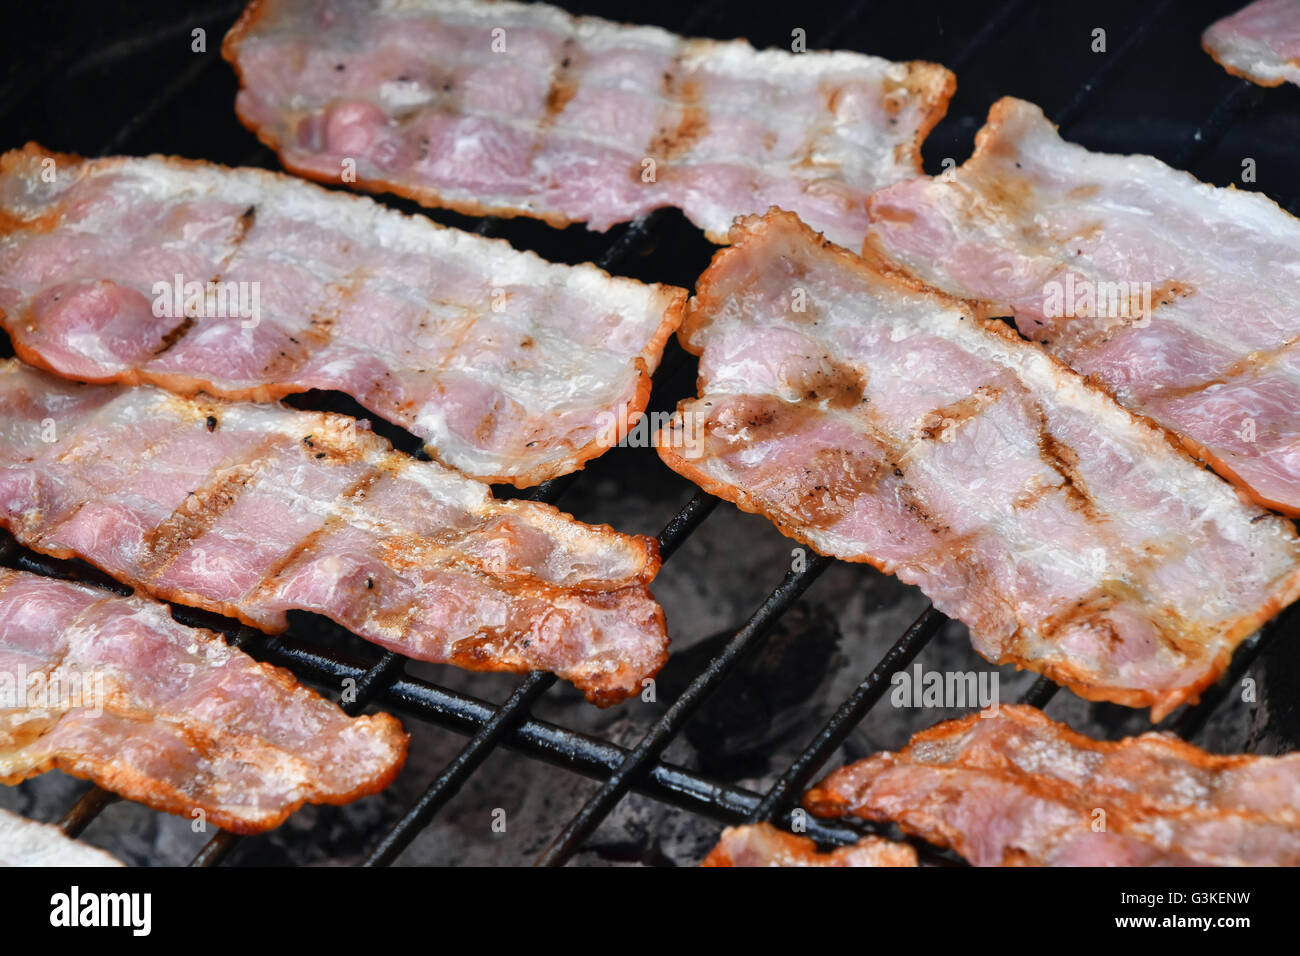 Seceral crispy smoked grilled barbecue bacon slices, cooked on bbq smoke grill, close up Stock Photo